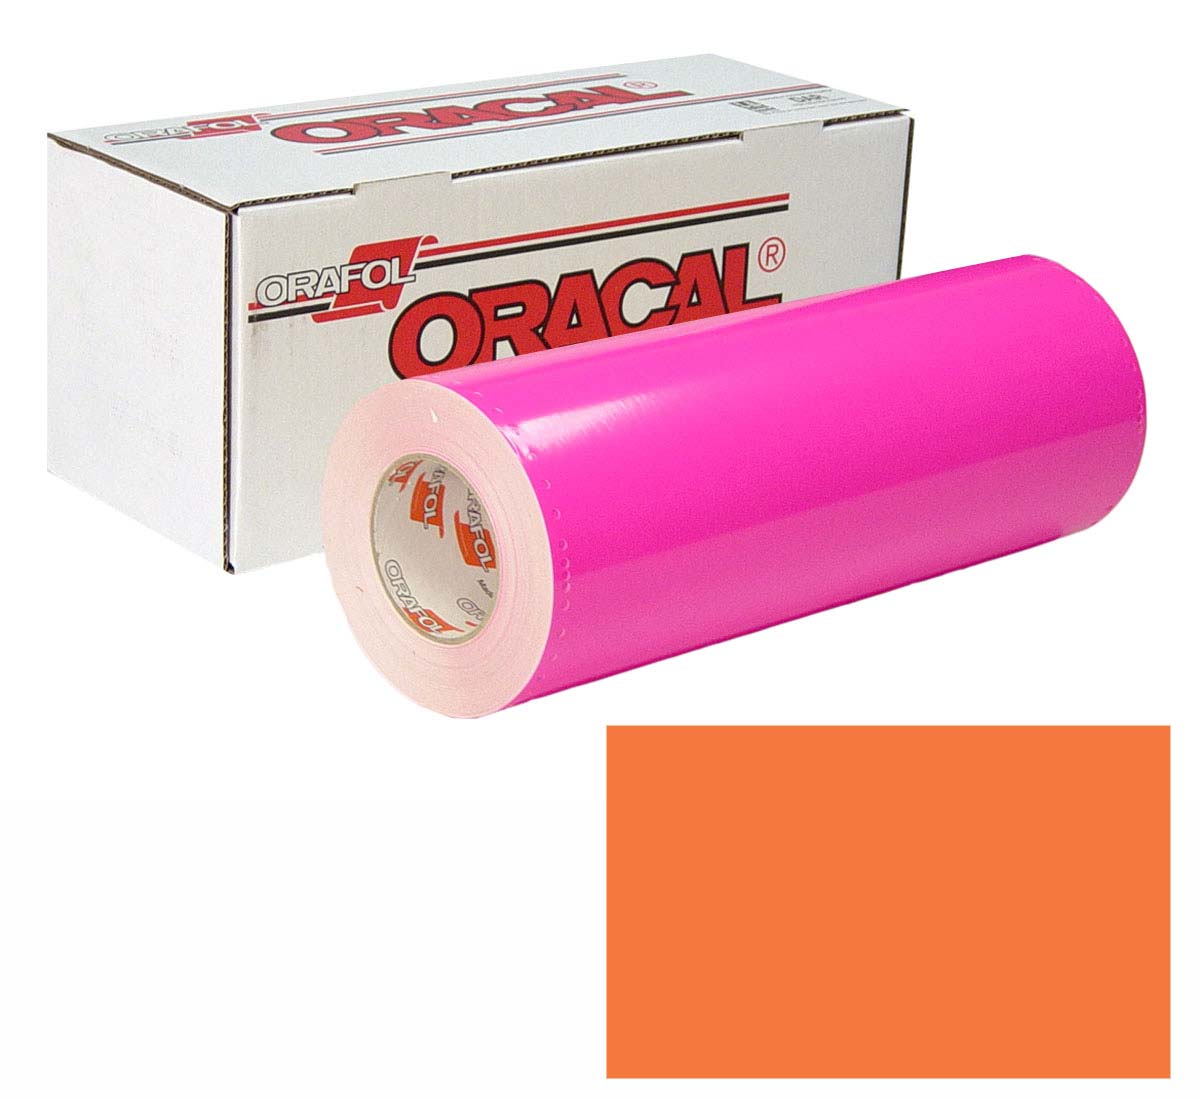 ORACAL 7510 Fluor 30in X 50yd 038 Red Orng